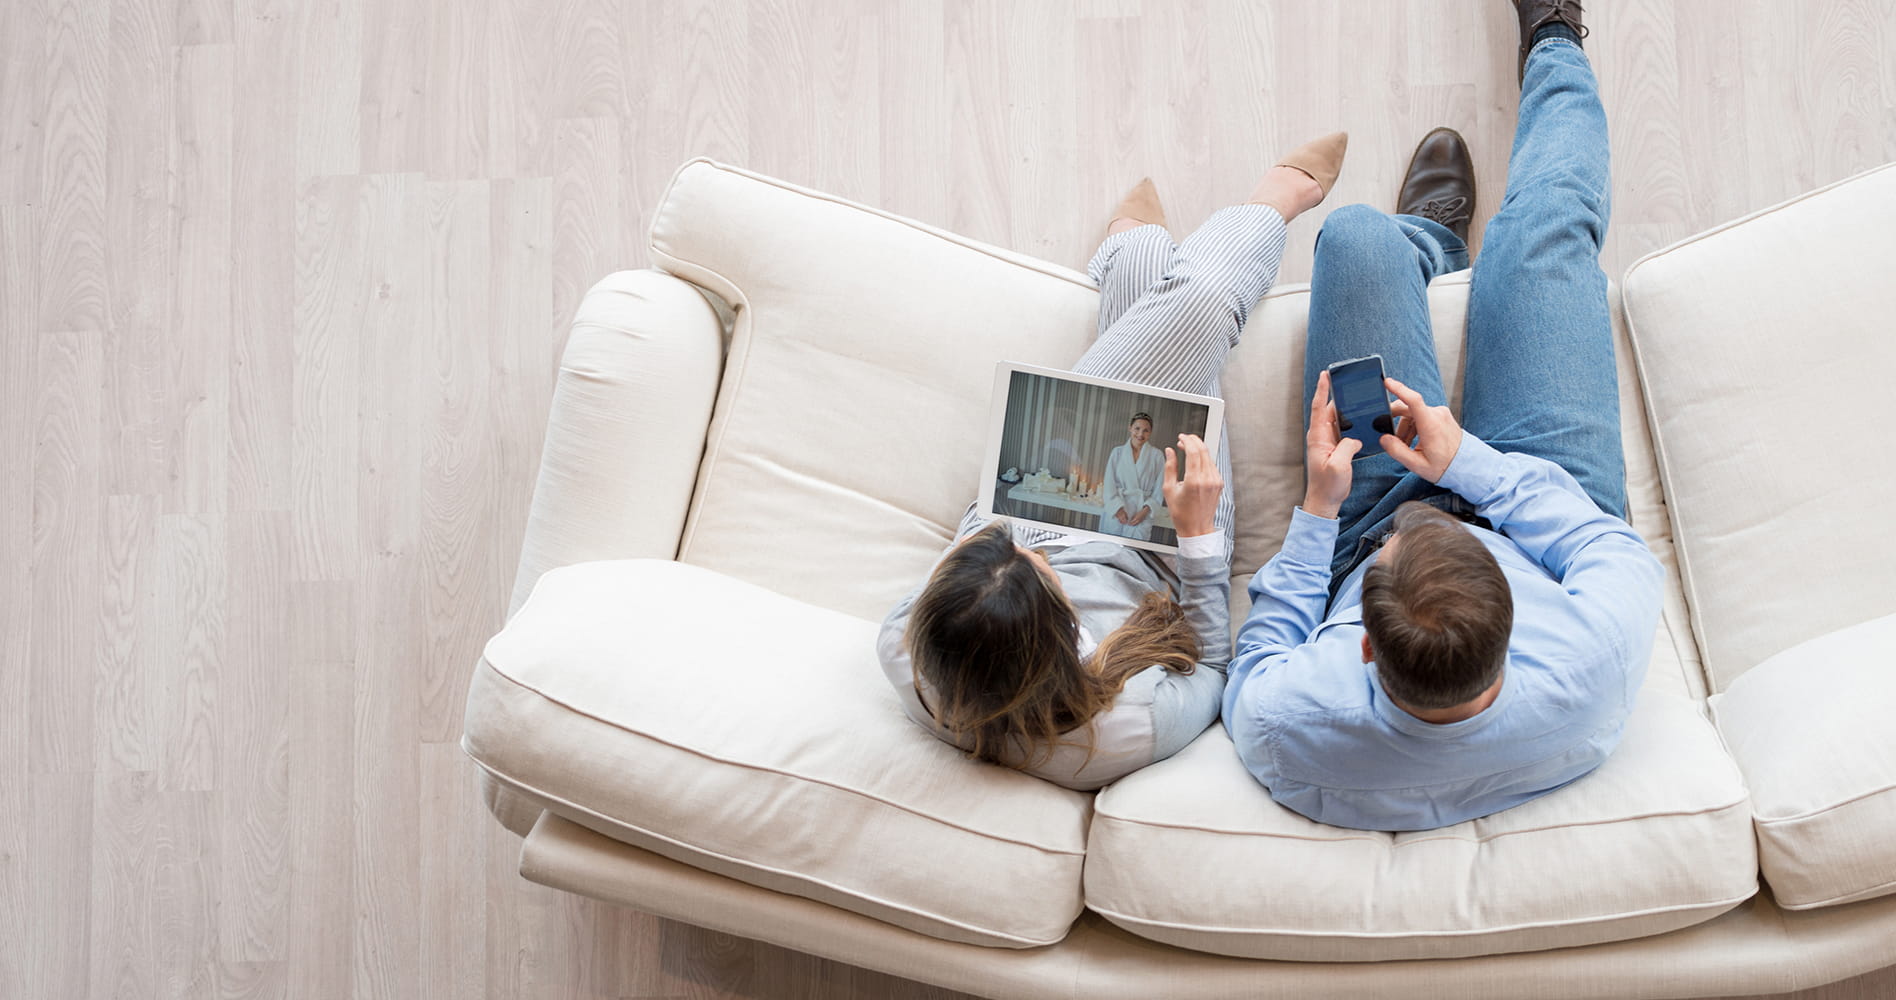 Couple sitting on sofa and using digital table and smartphone